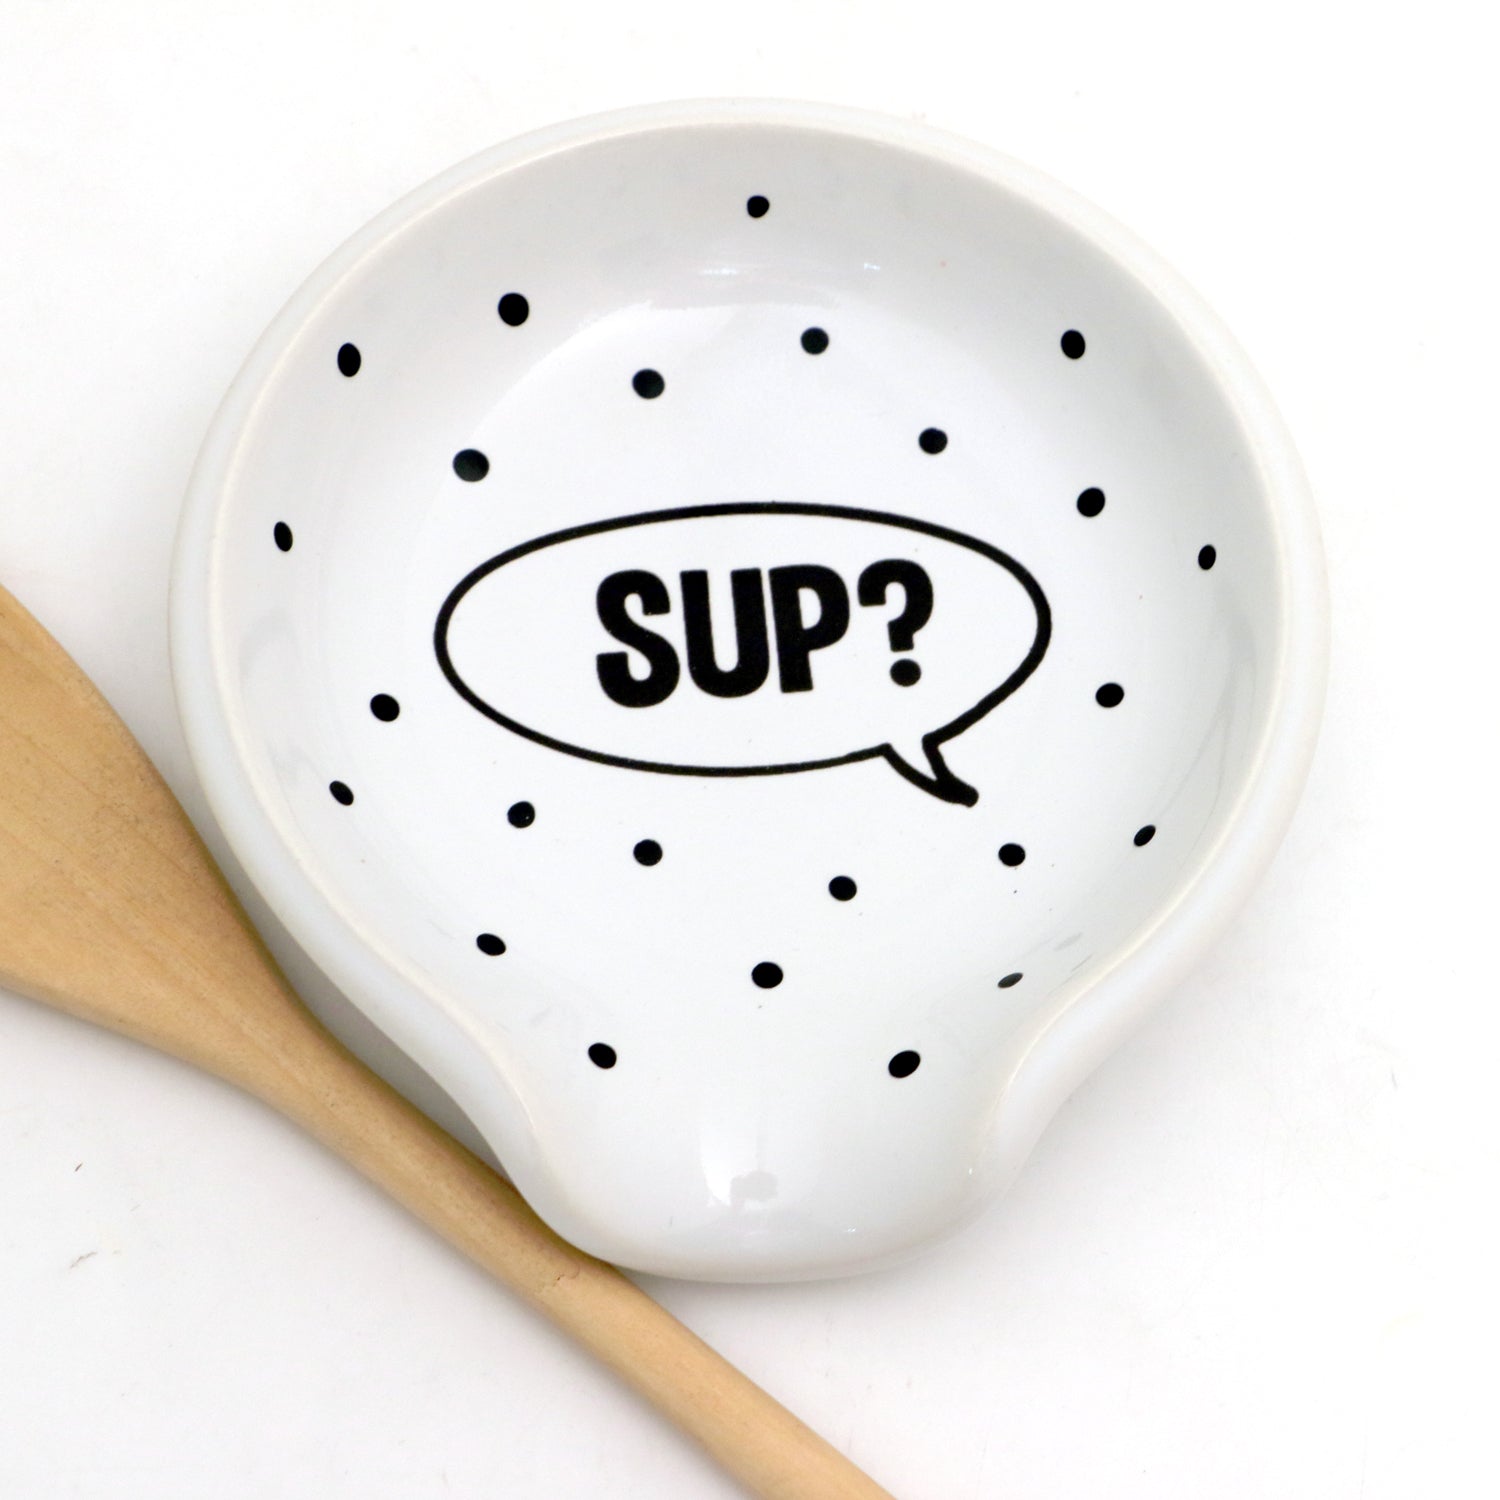 Sup? Spoon rest, funny gift for cook, kitchen gift – LennyMud